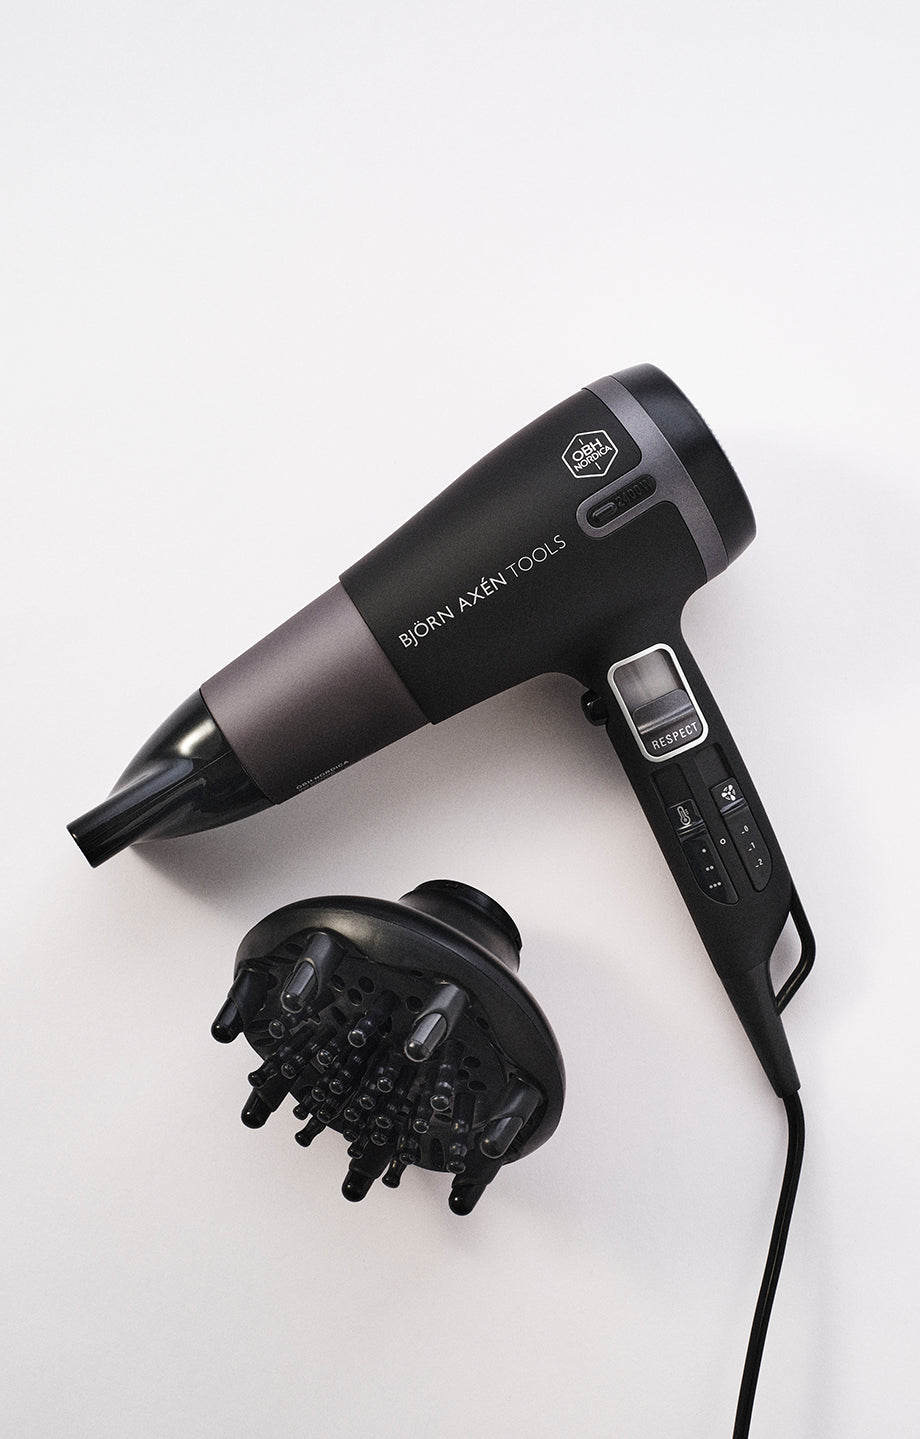 A hair dryer with special features for dry and damaged hair